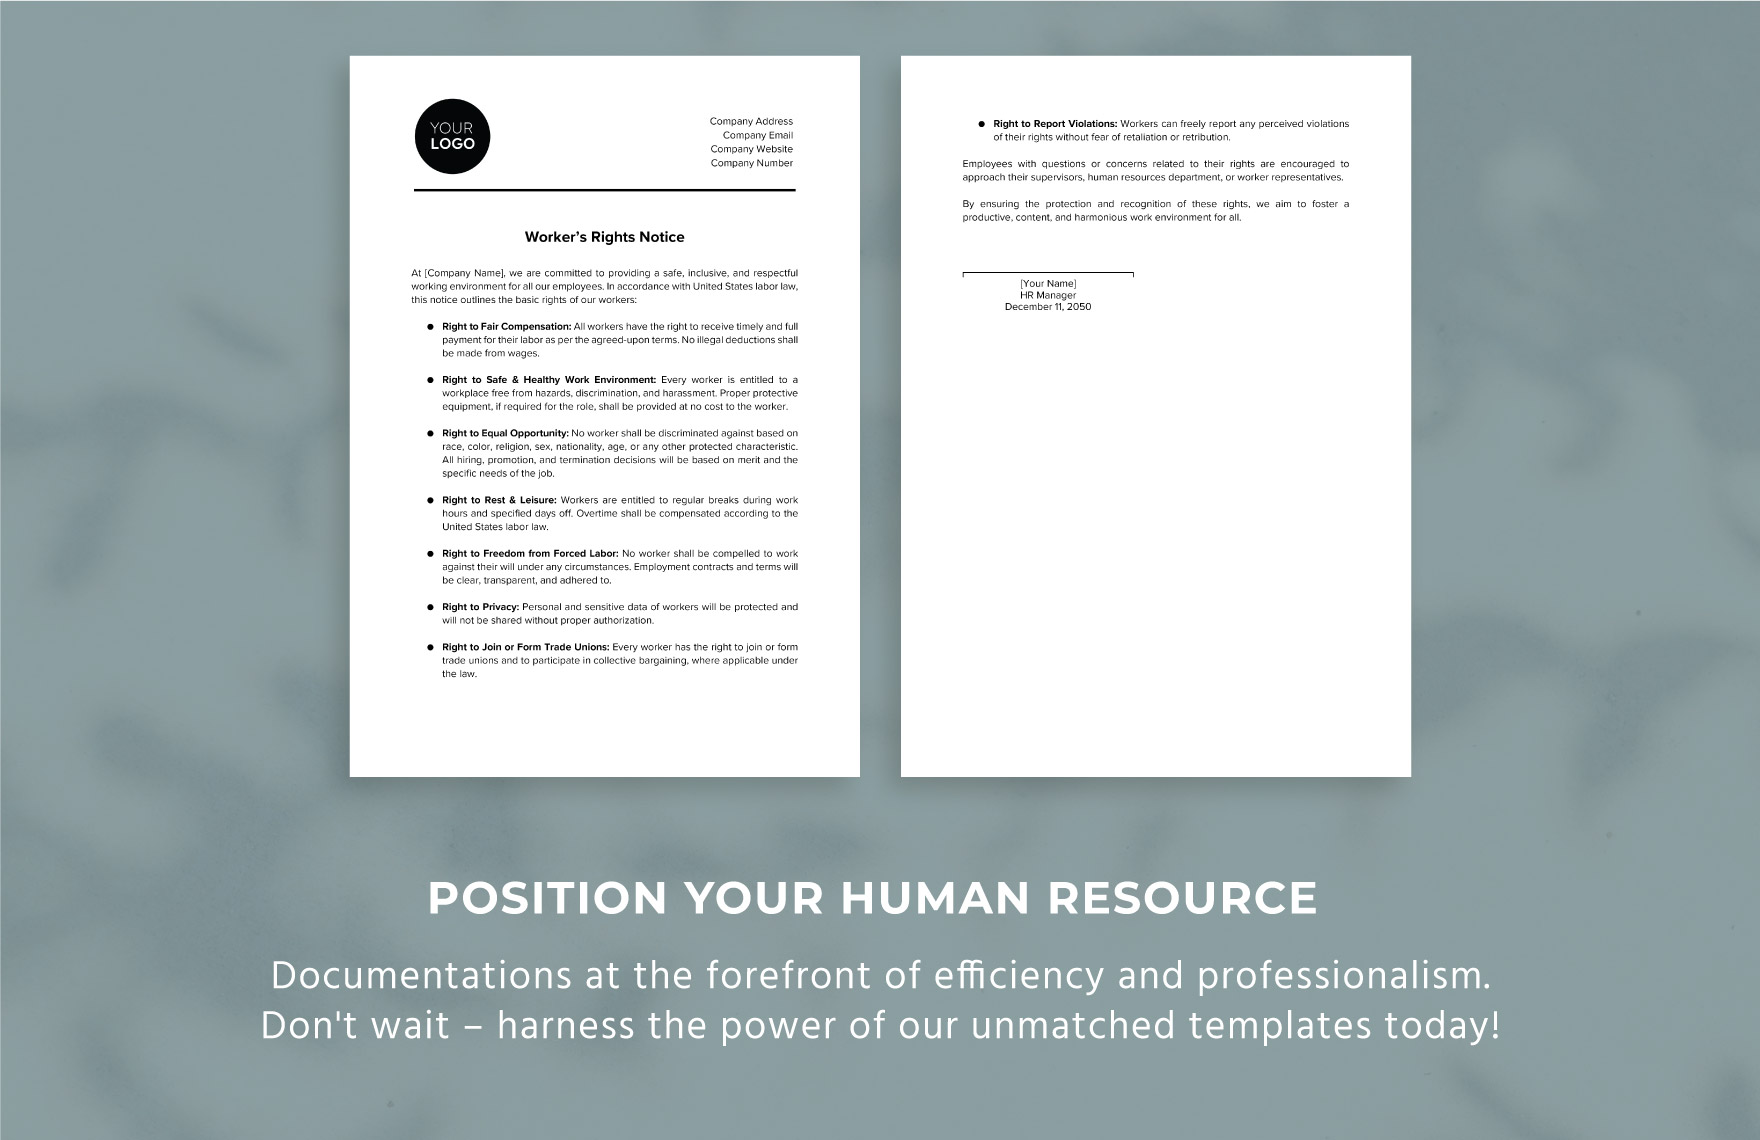 Workers' Rights Notice HR Template